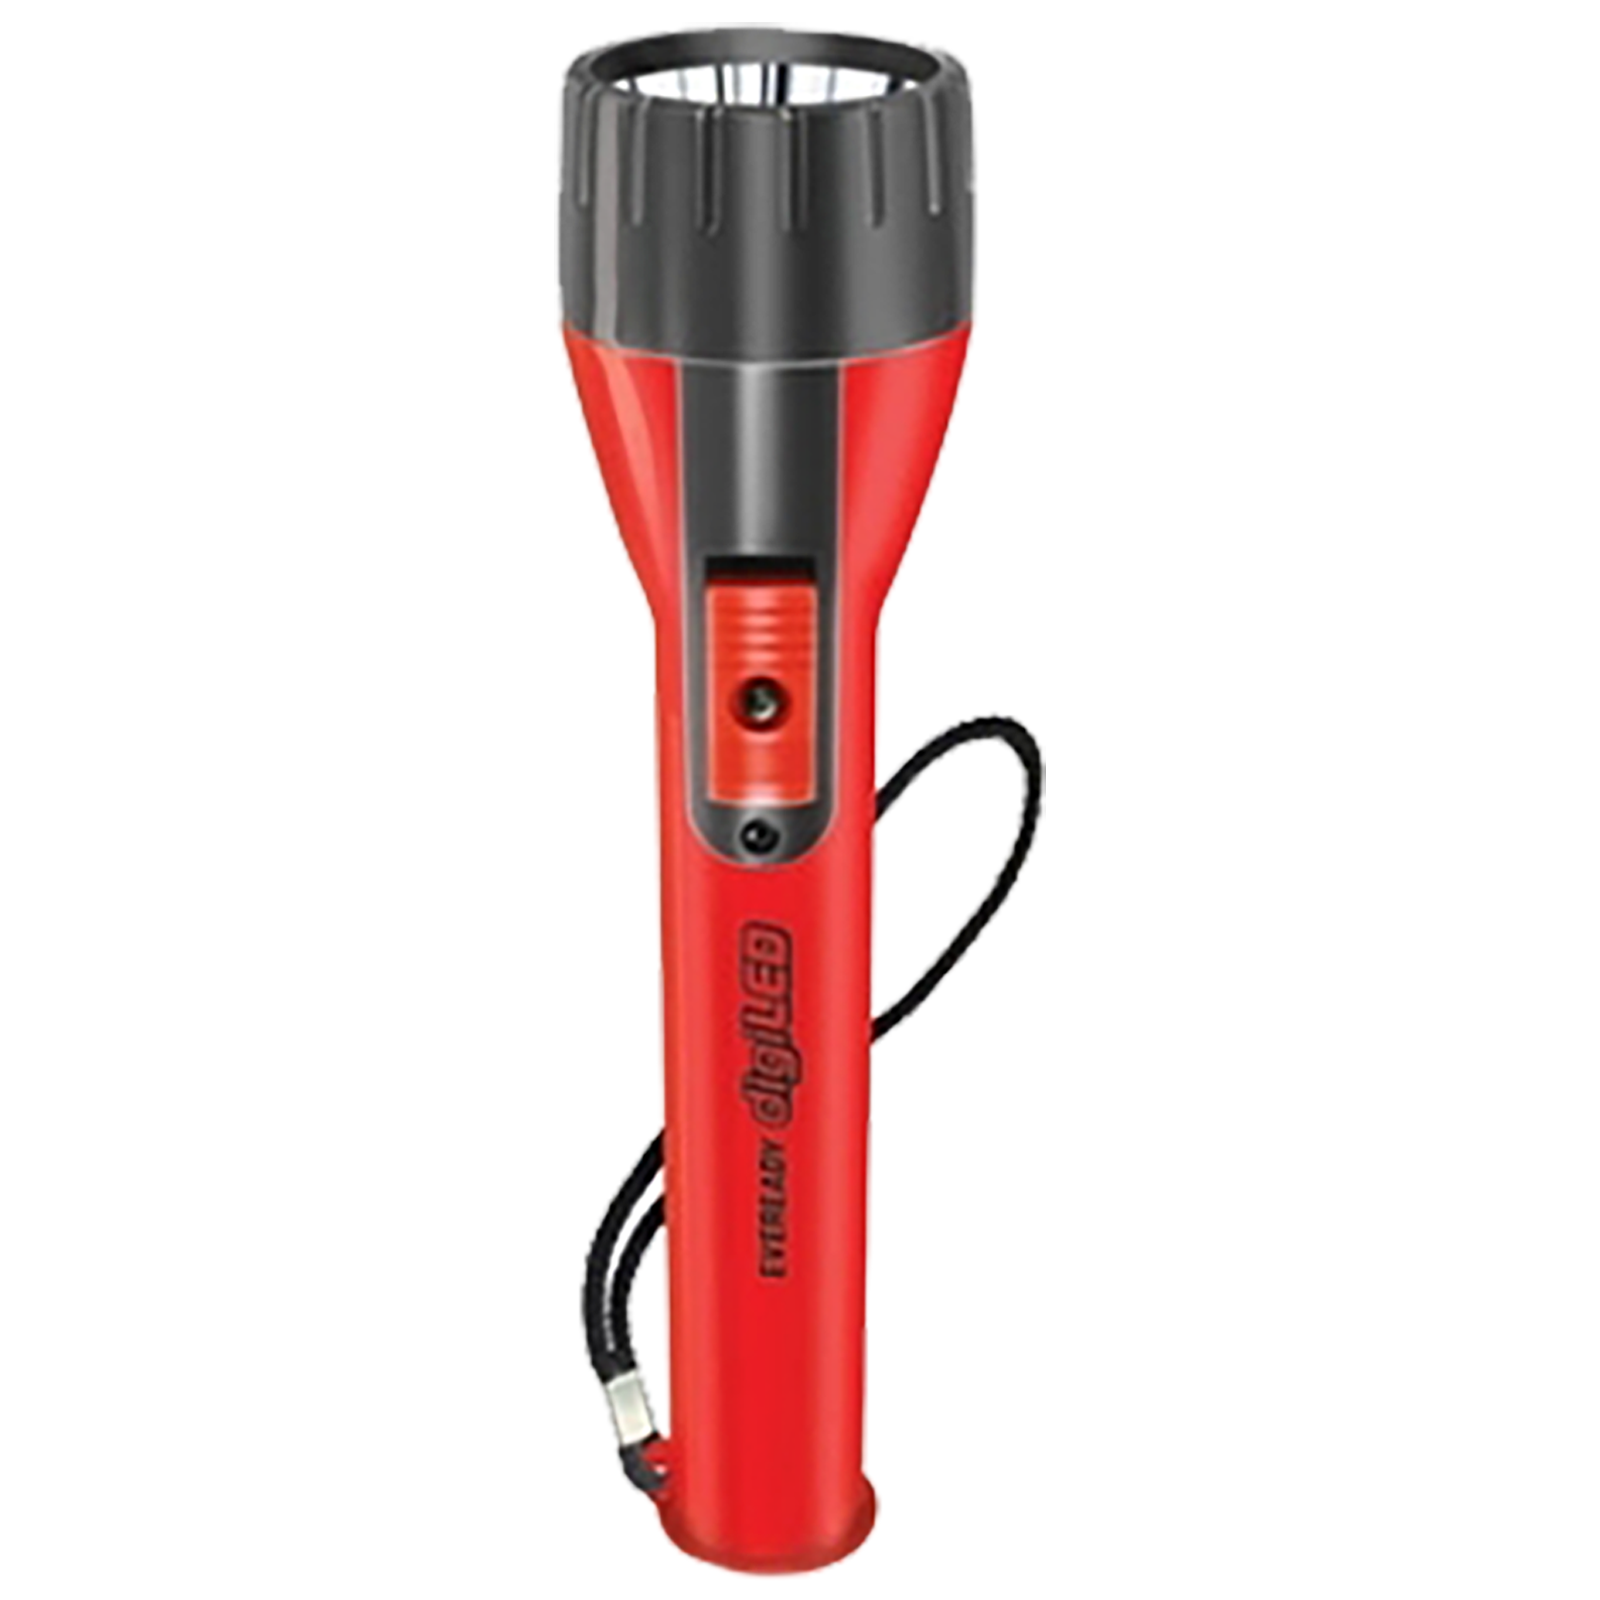 Eveready Conica 0.75 Watts LED Torch (120 Lumens, Intense White Light, EVE DL07, Red/Black)